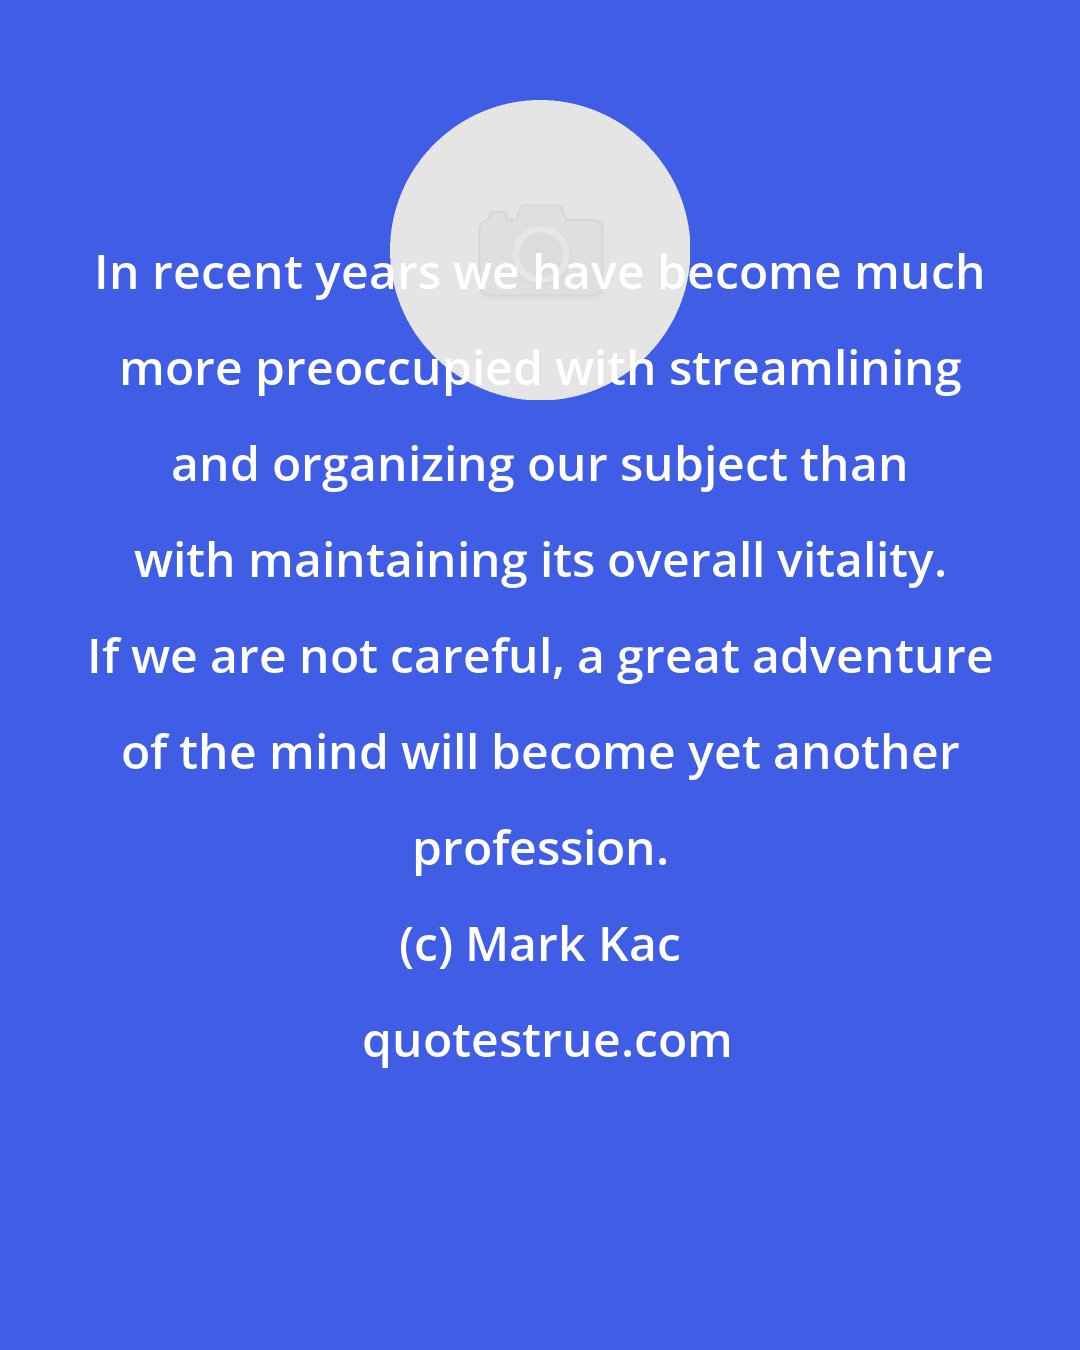 Mark Kac: In recent years we have become much more preoccupied with streamlining and organizing our subject than with maintaining its overall vitality. If we are not careful, a great adventure of the mind will become yet another profession.